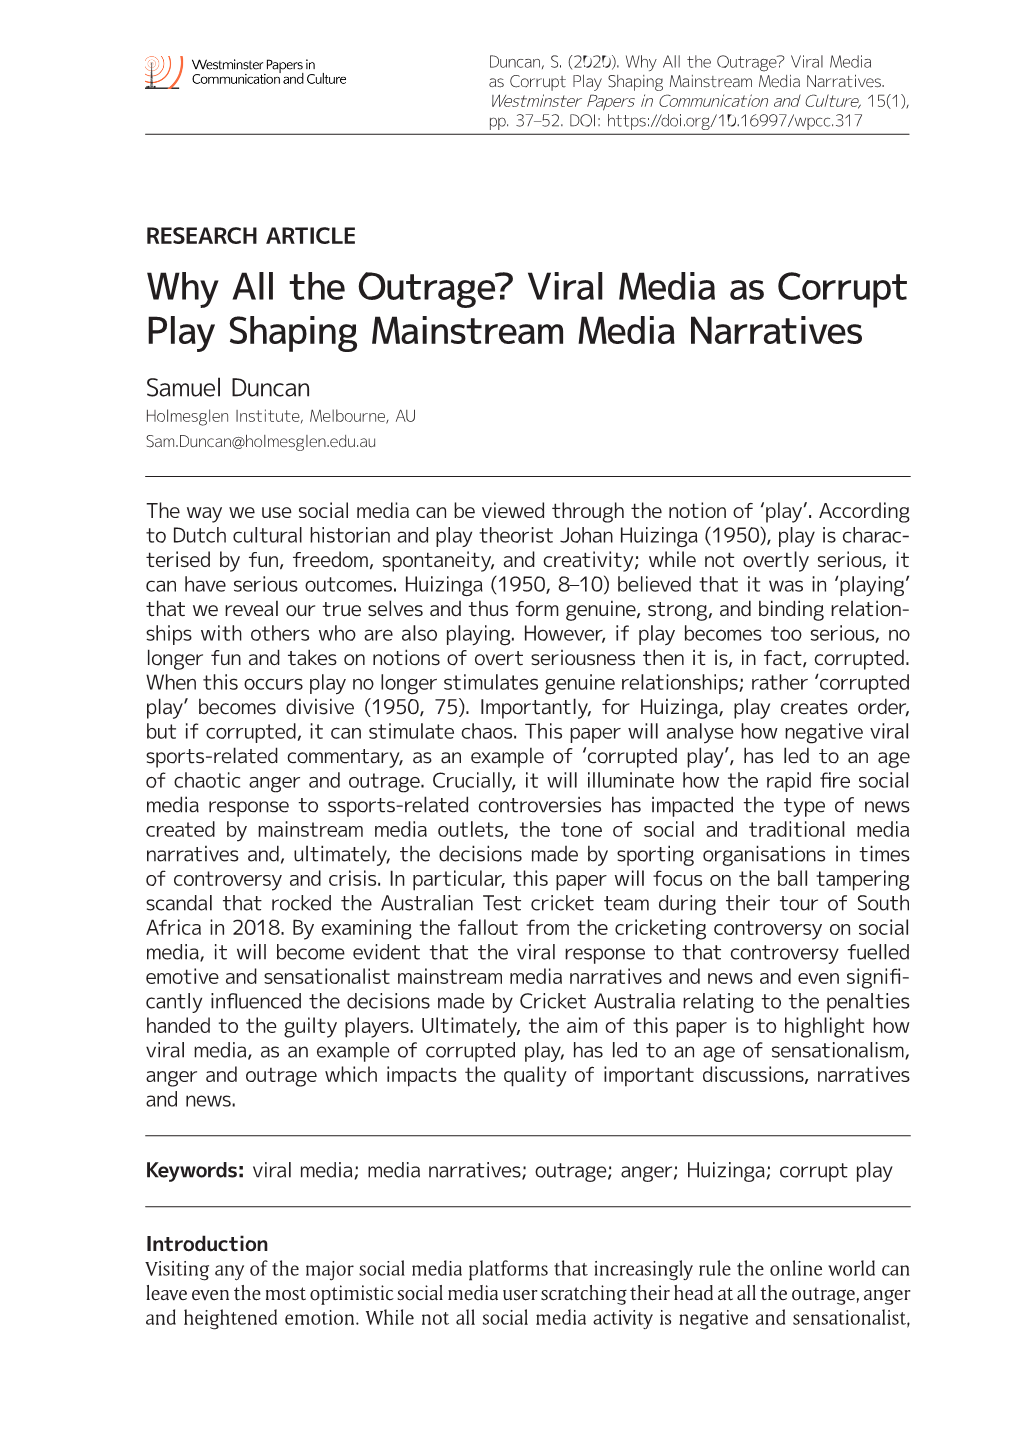 Why All the Outrage? Viral Media As Corrupt Play Shaping Mainstream Media Narratives